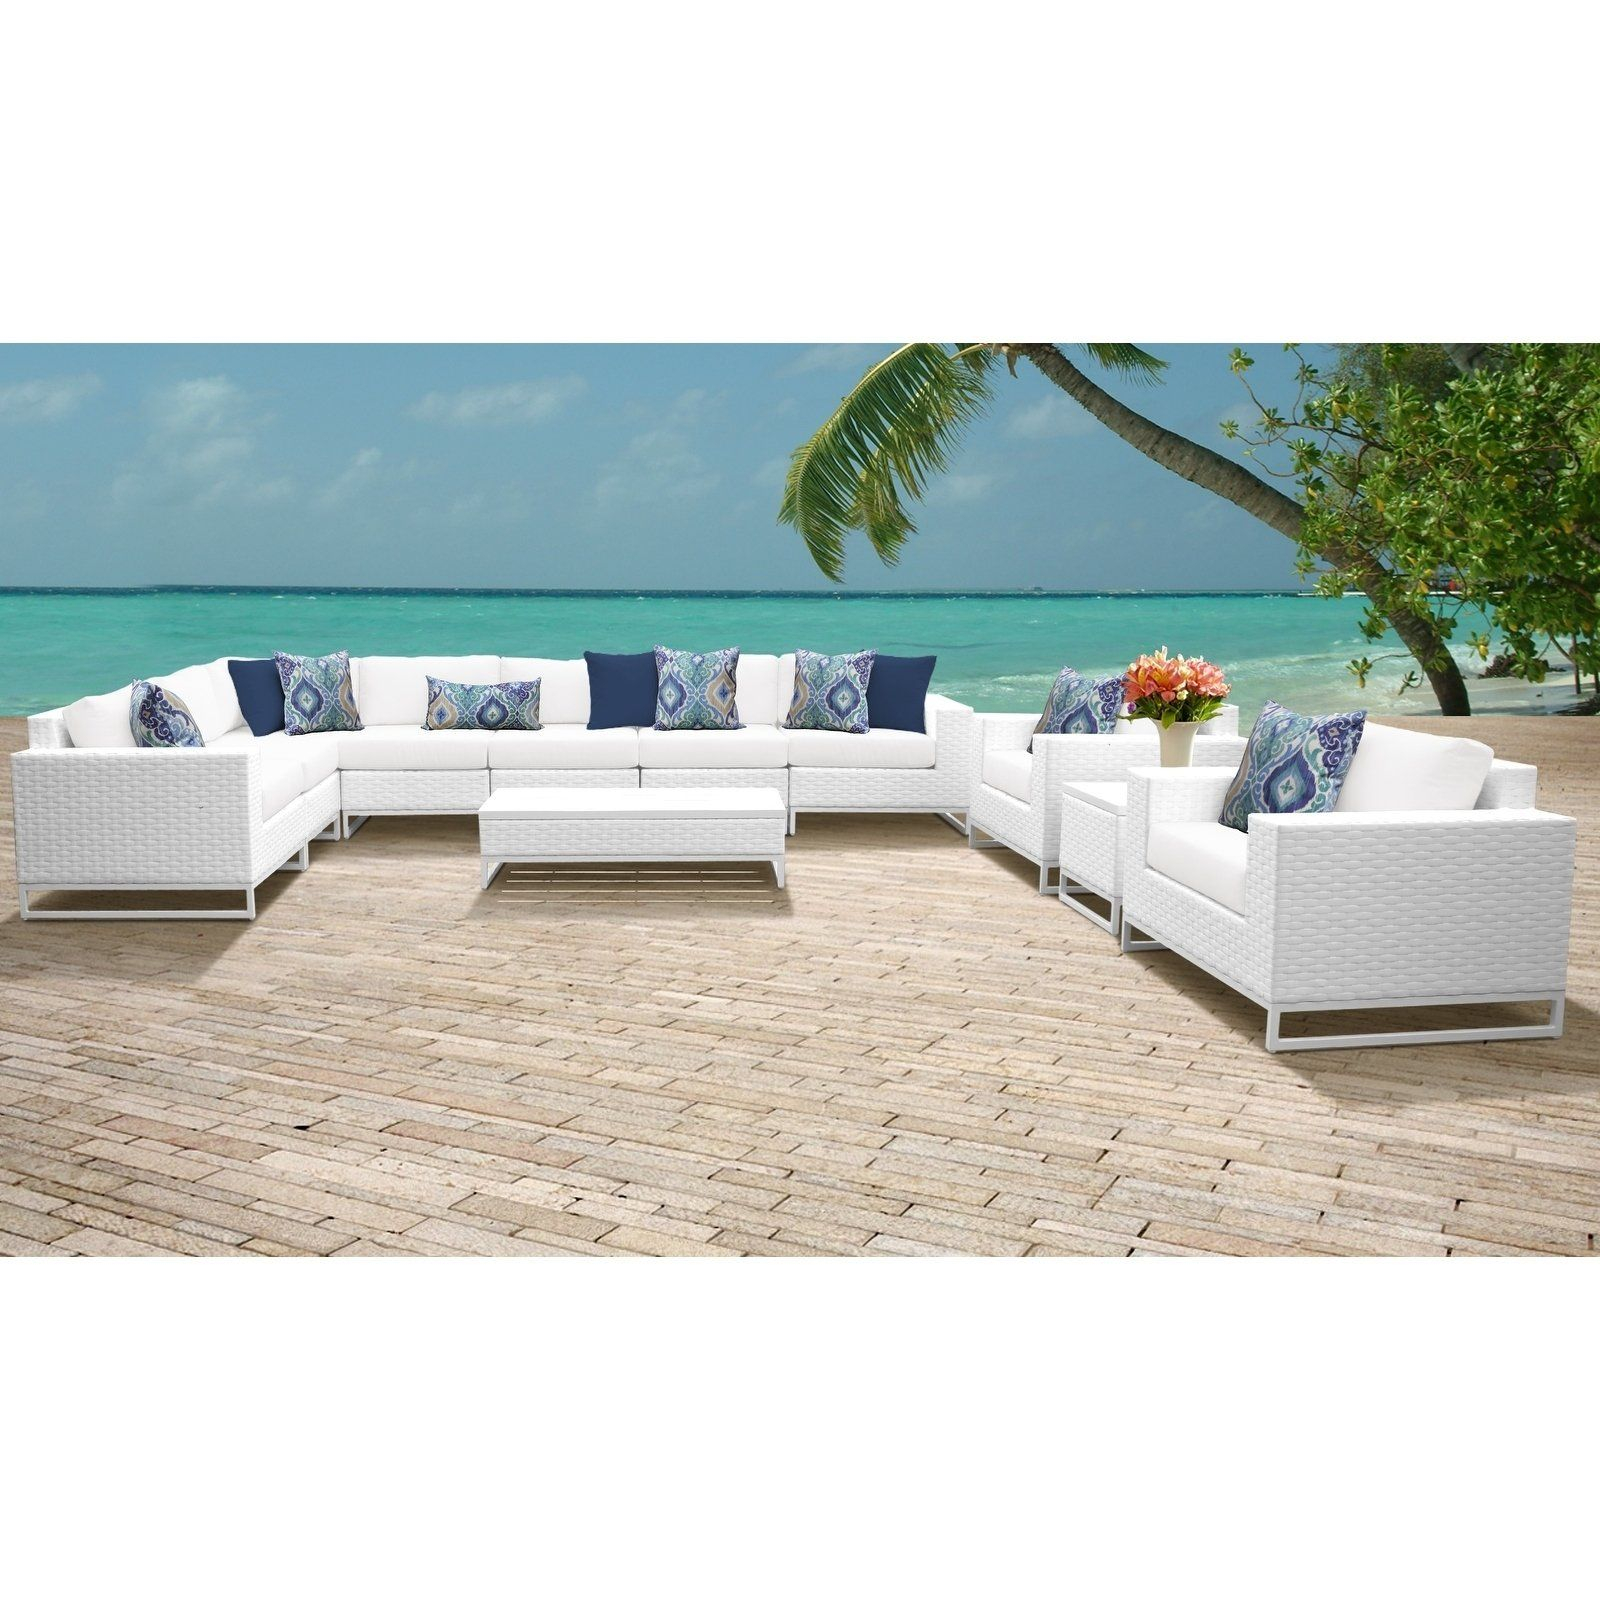 Miami 11 Piece Outdoor Wicker Patio Furniture Set 11a White inside proportions 1600 X 1600